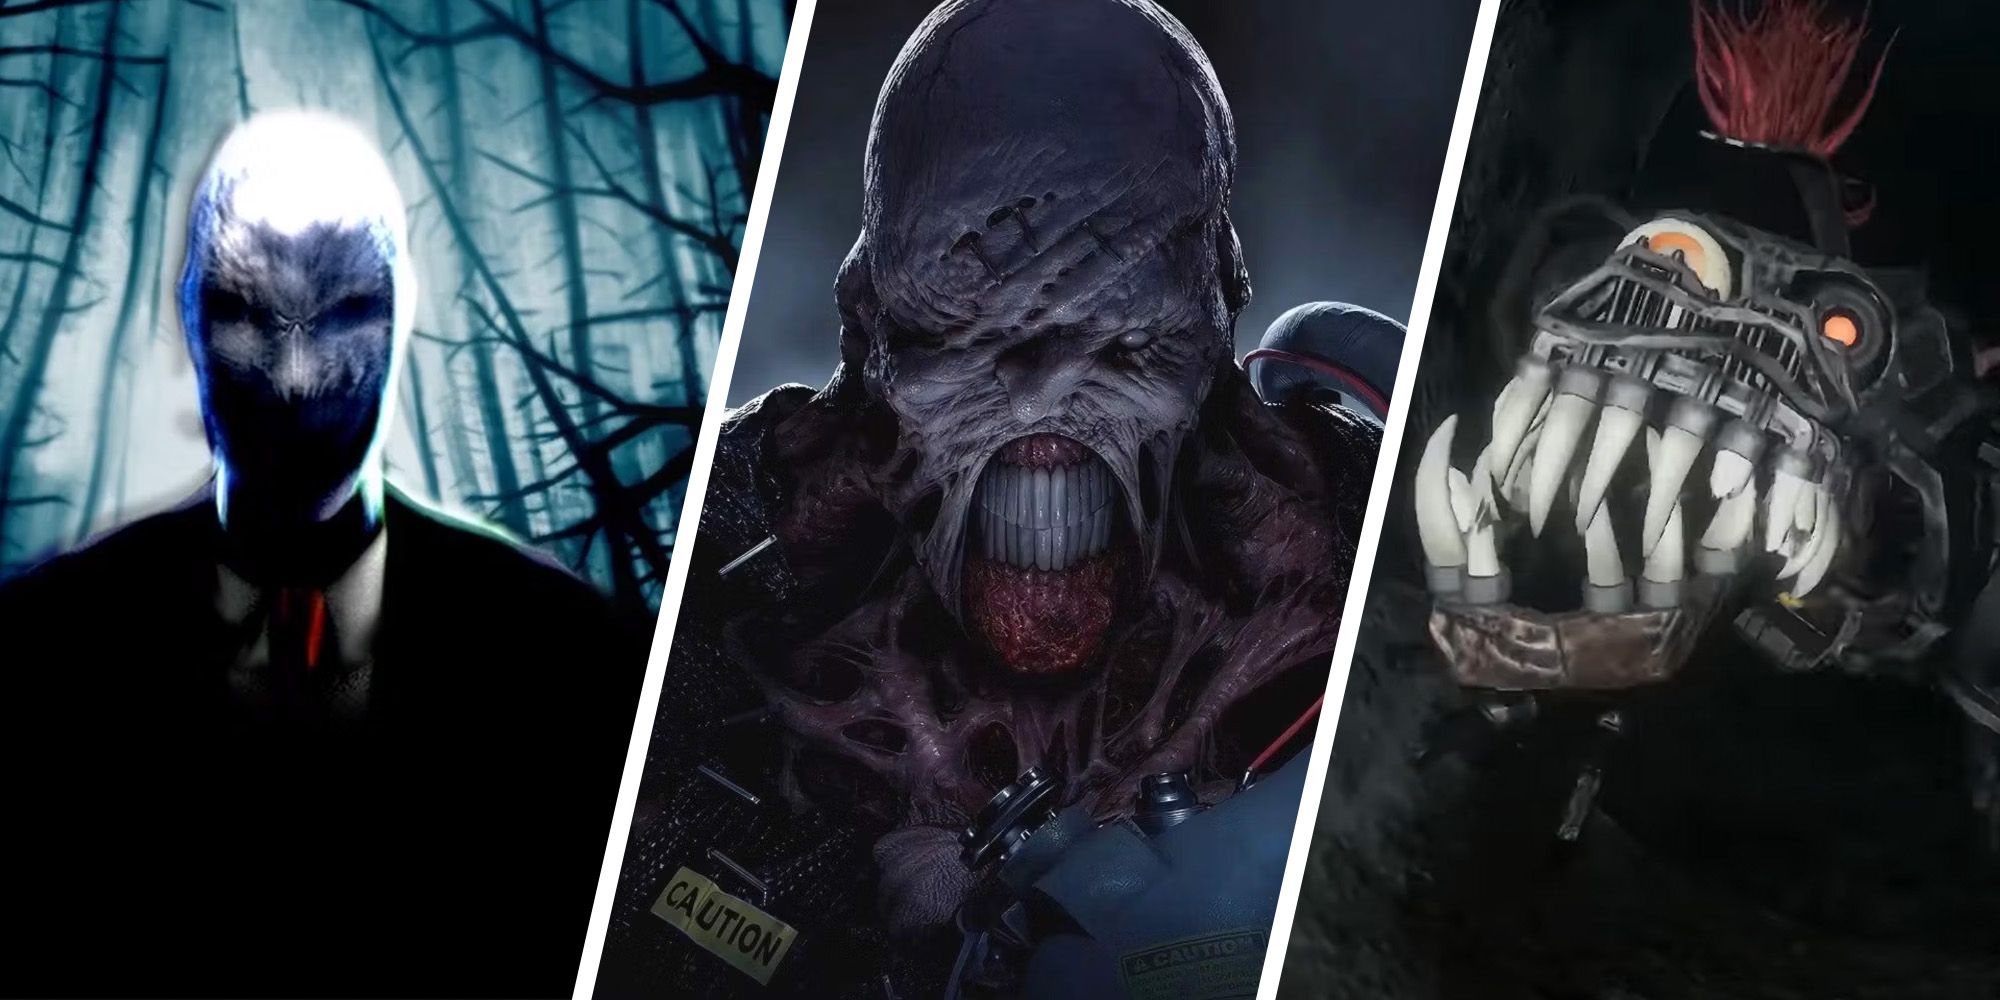 Best Jump Scares In Video Games - Split Image of Slender Man From Slender The Arrival, Nemesis From Resident Evil 3, And Monty Gator From Five Nights At Freddy's Ruin